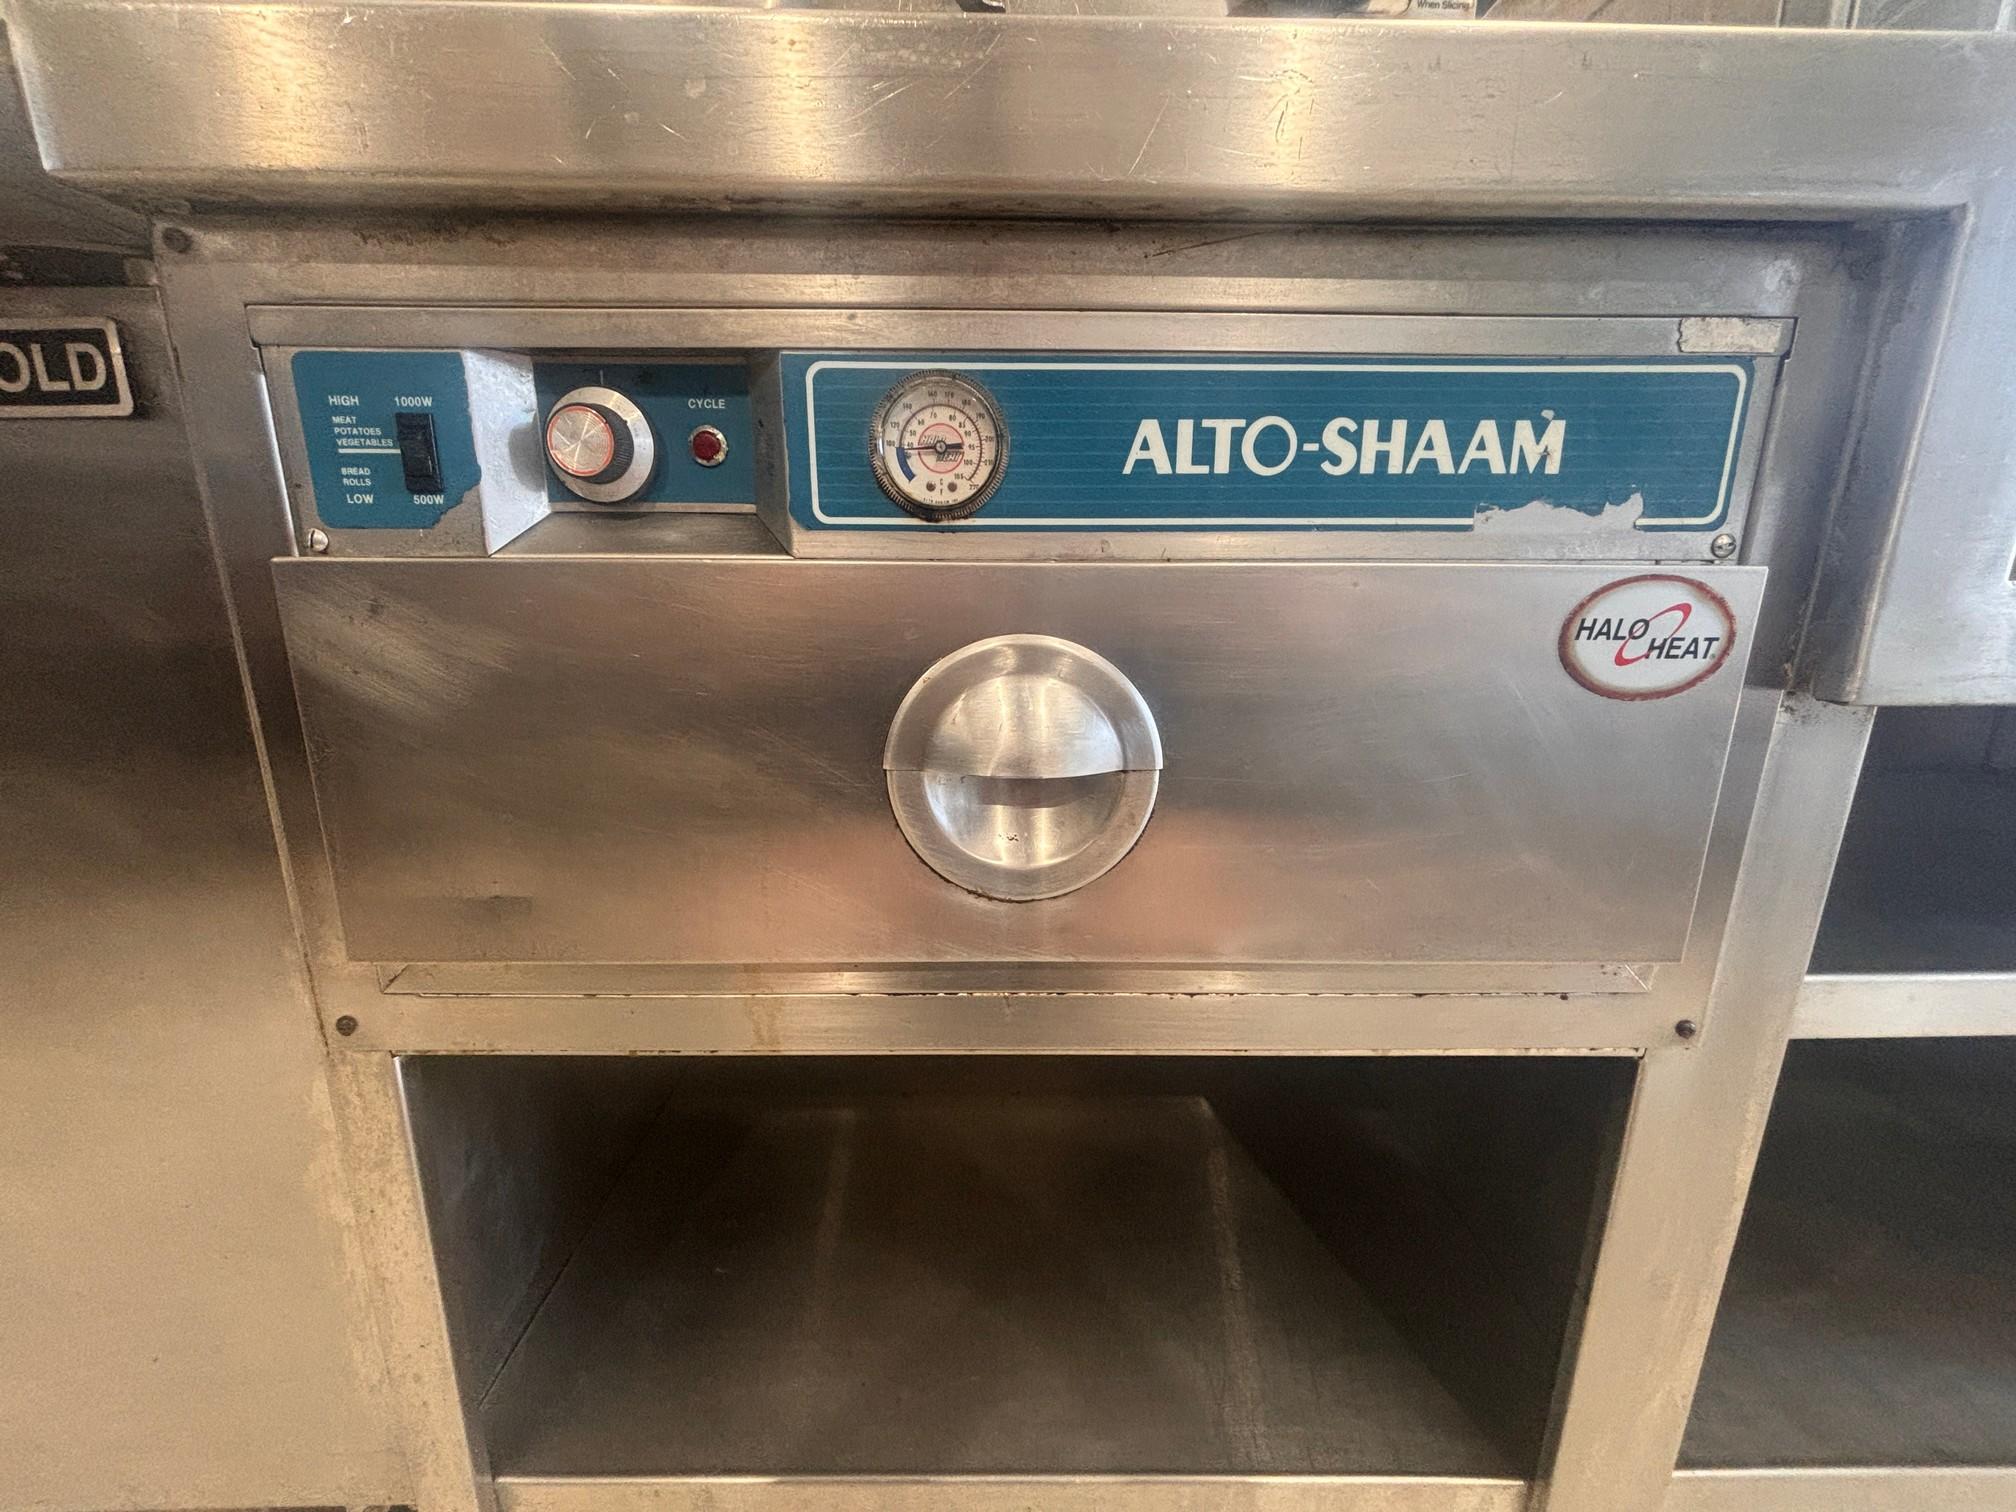 Alto-Shaam Equipment Stand with Food Warming Drawer